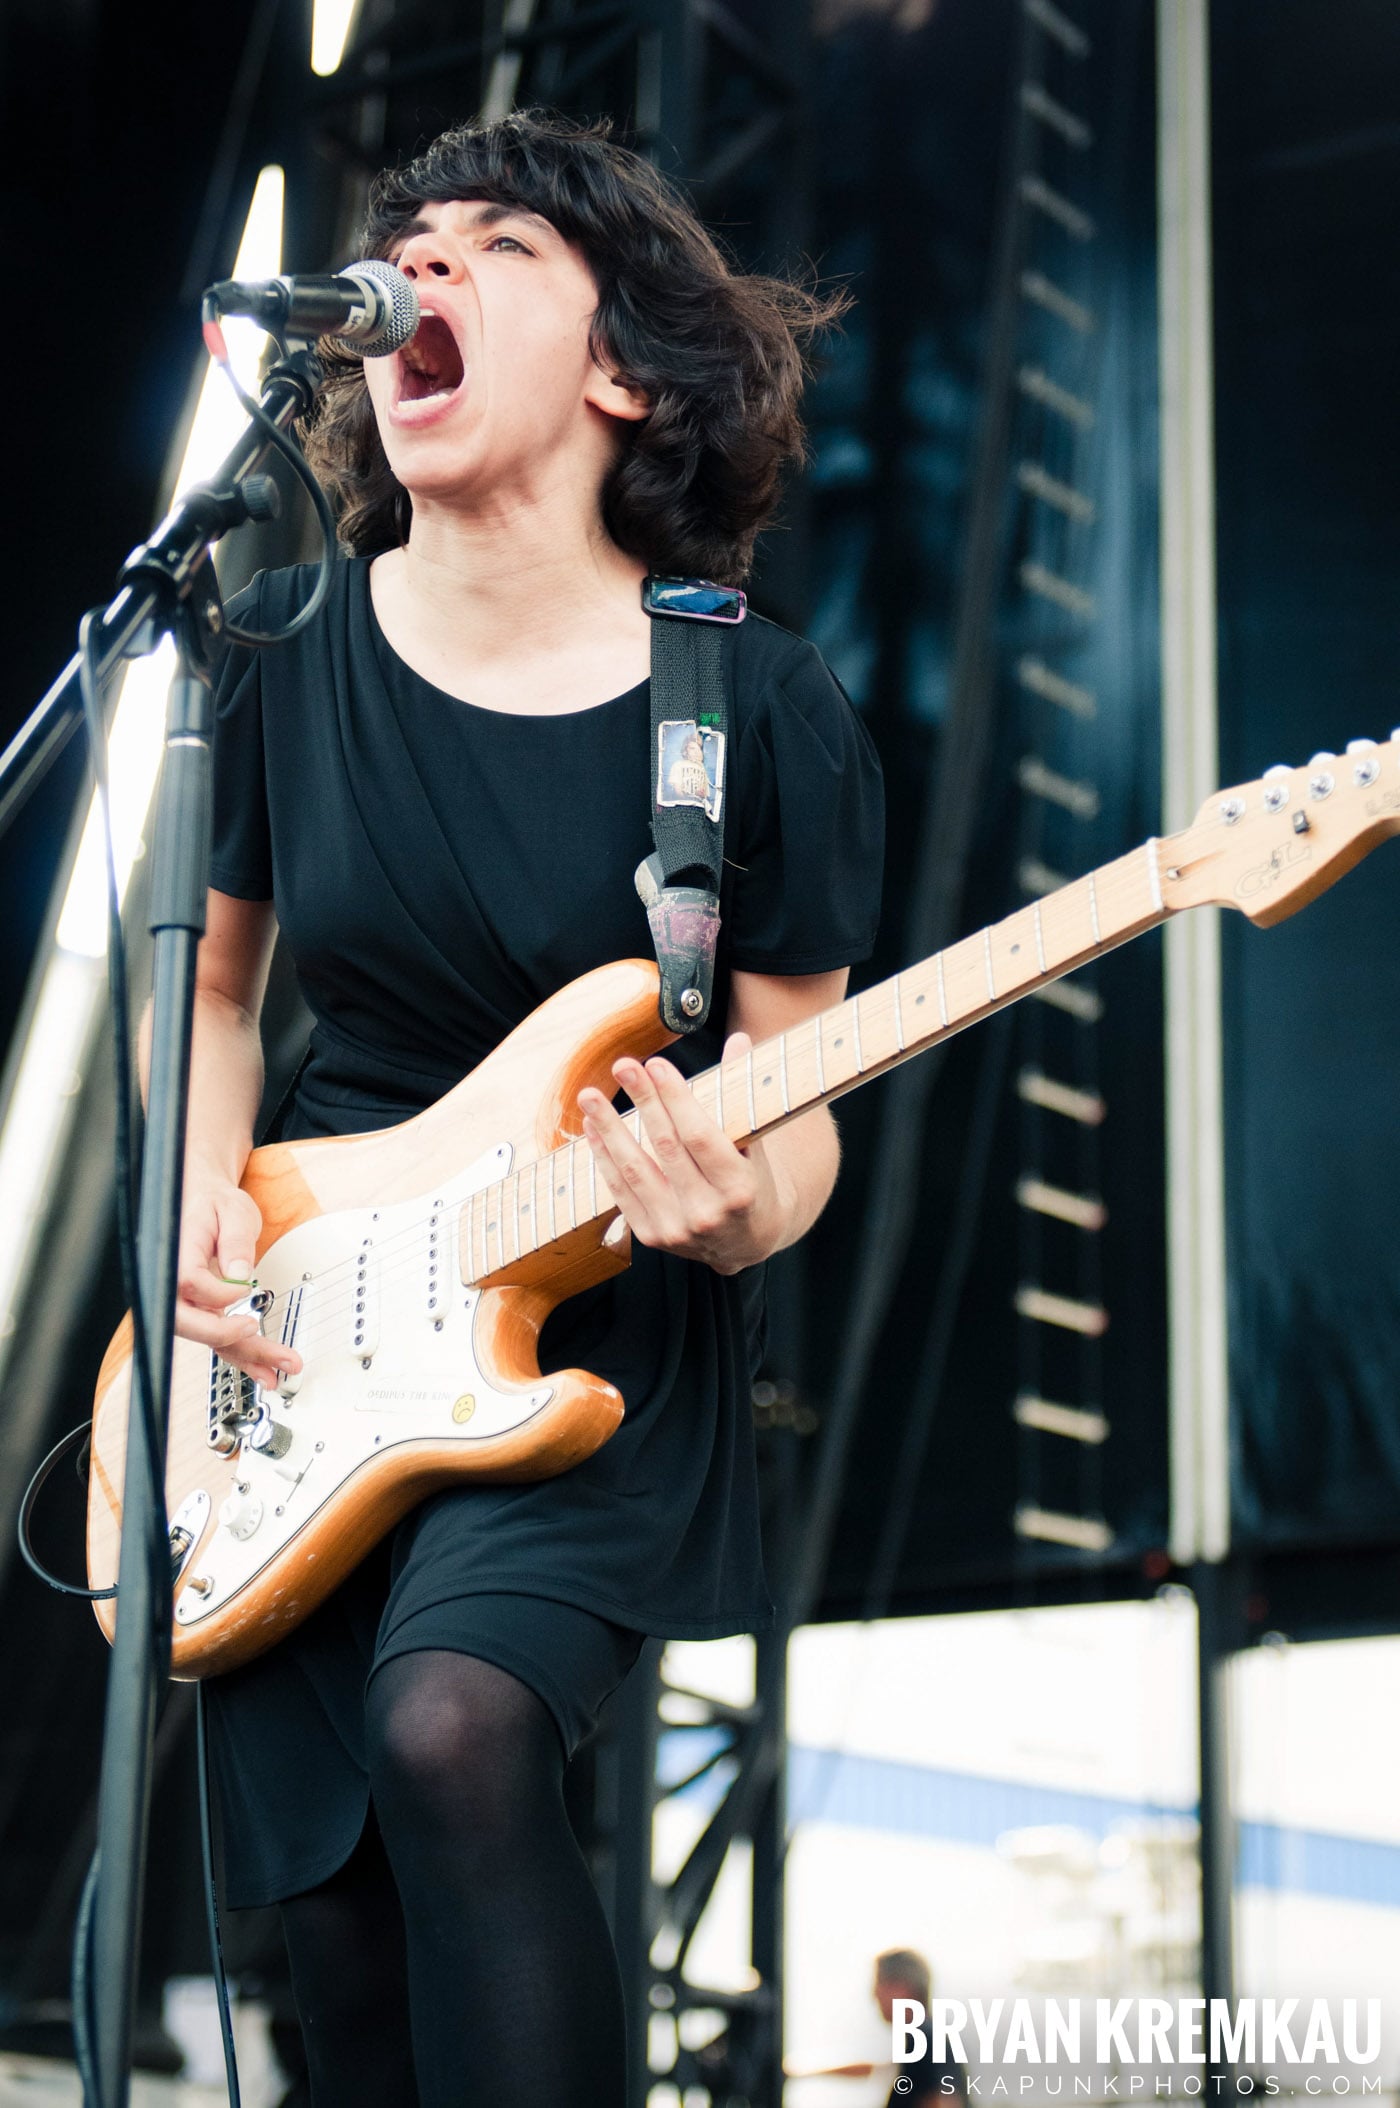 The Screaming Females @ Riot Fest 2012, Williamsburg Park NY - 9.8.12 (8)